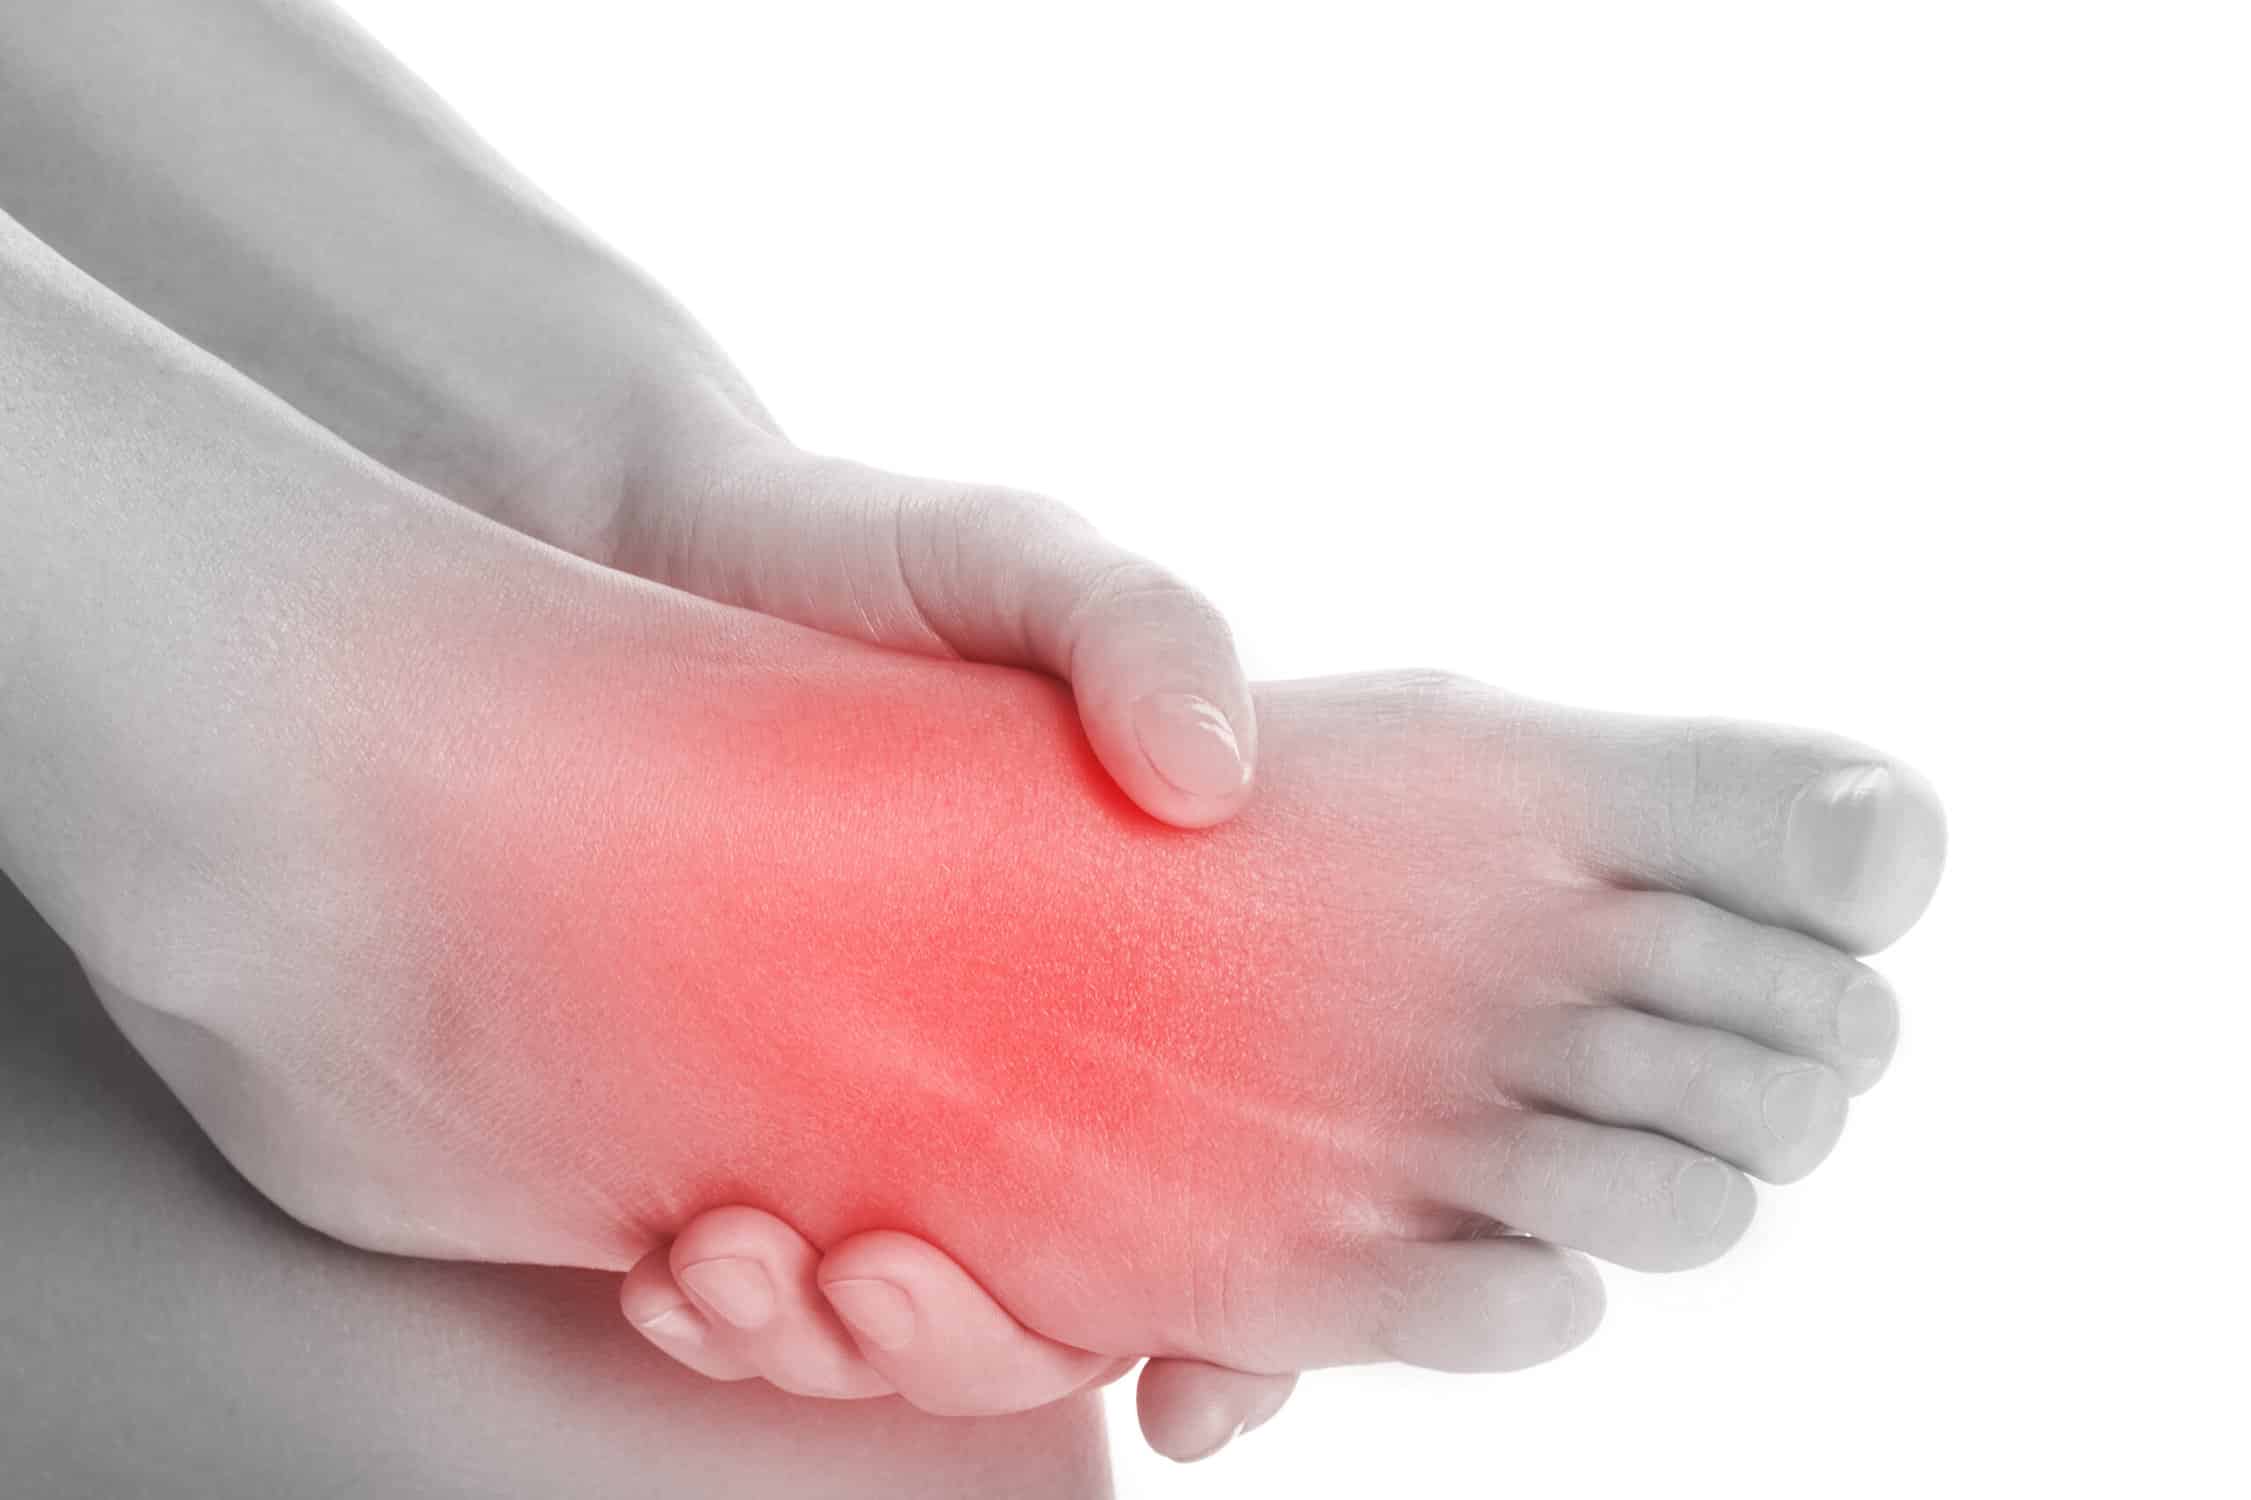 woman suffering with neuropathy in the foot